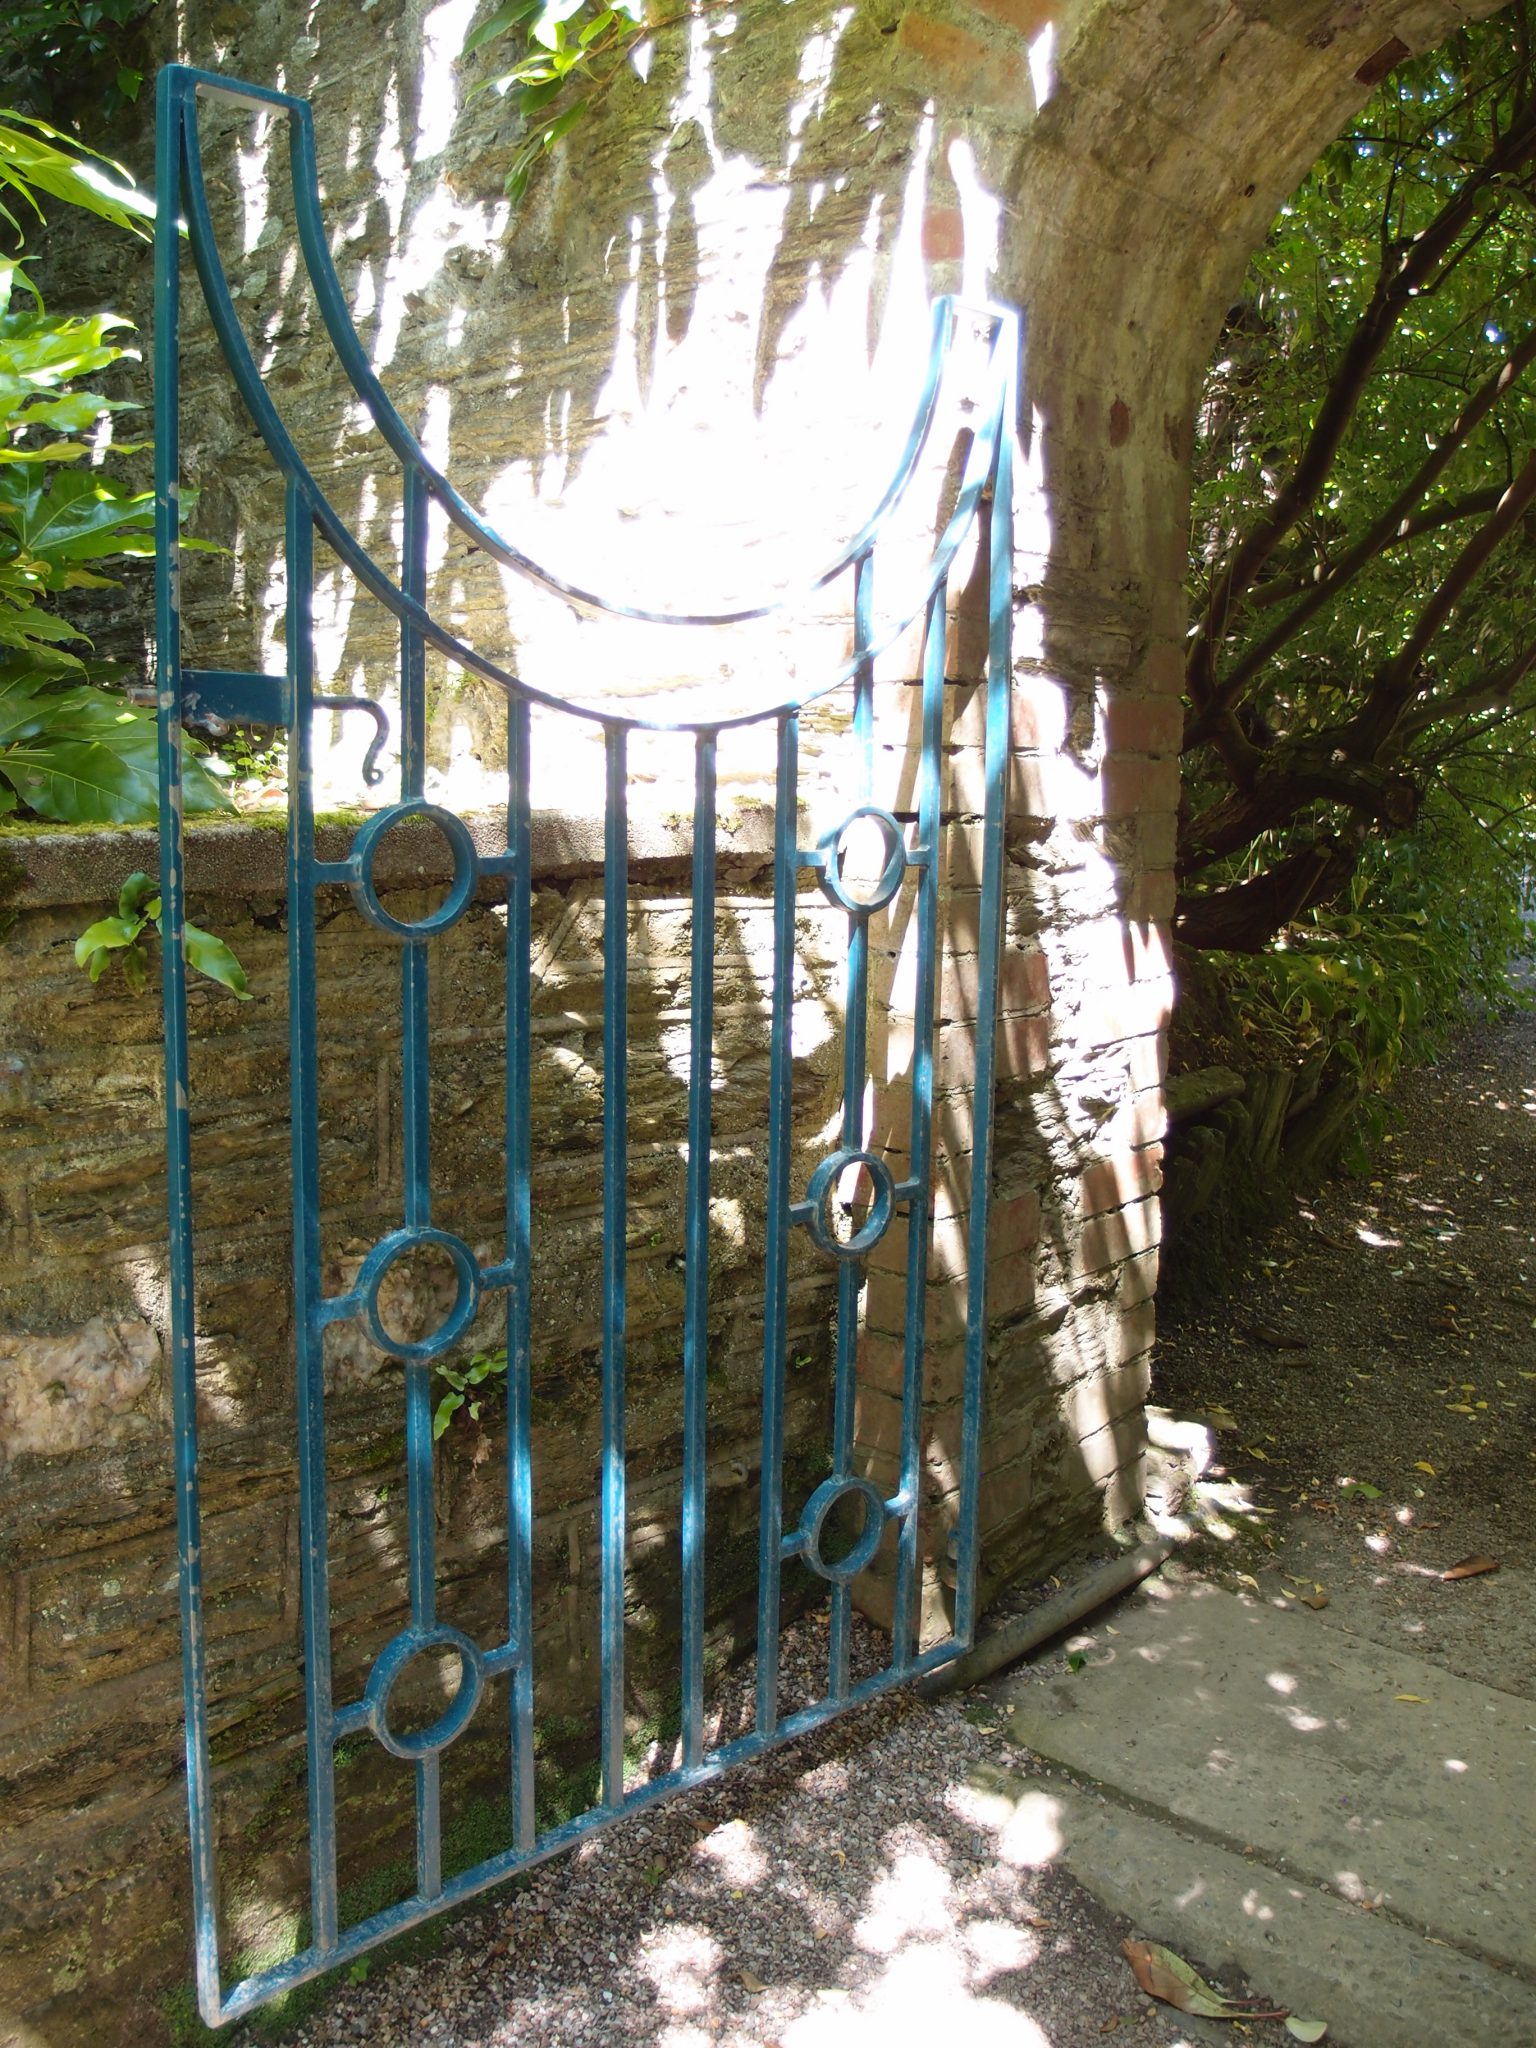 The Gate separates the Banana Garden from the Palm Gardens.